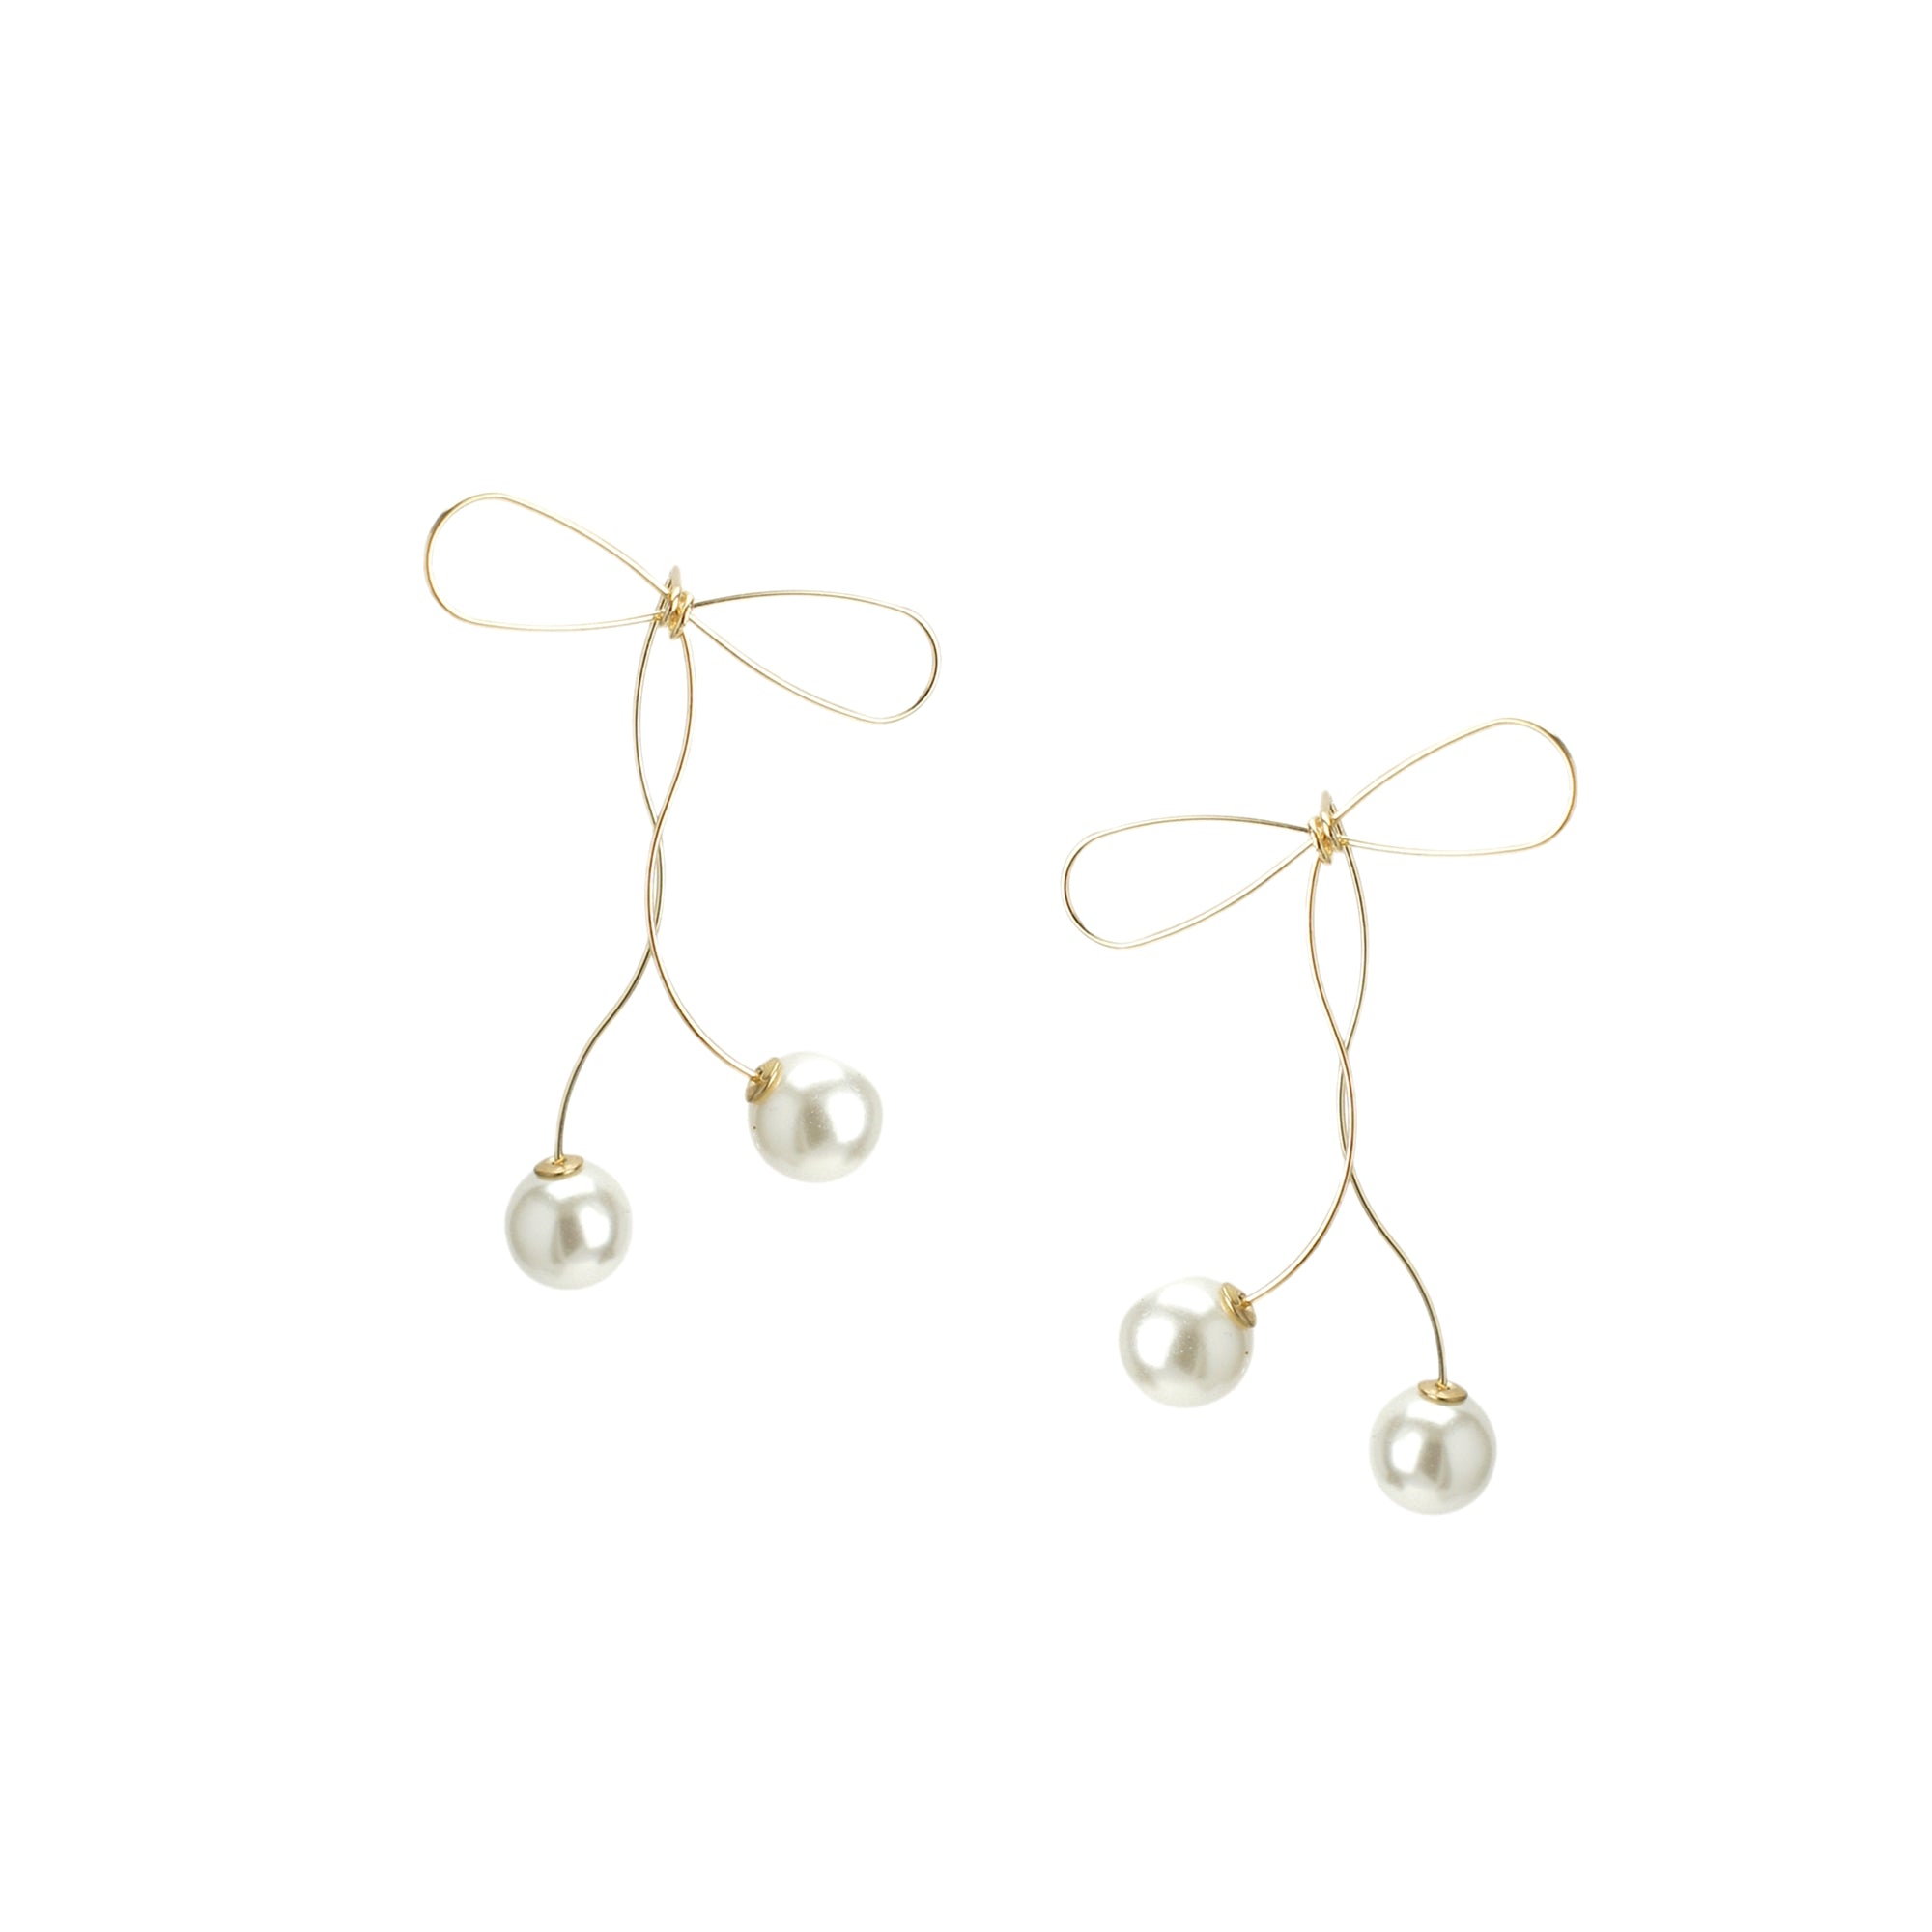 Flowy Golden Bow Earrings with Pearl Ends